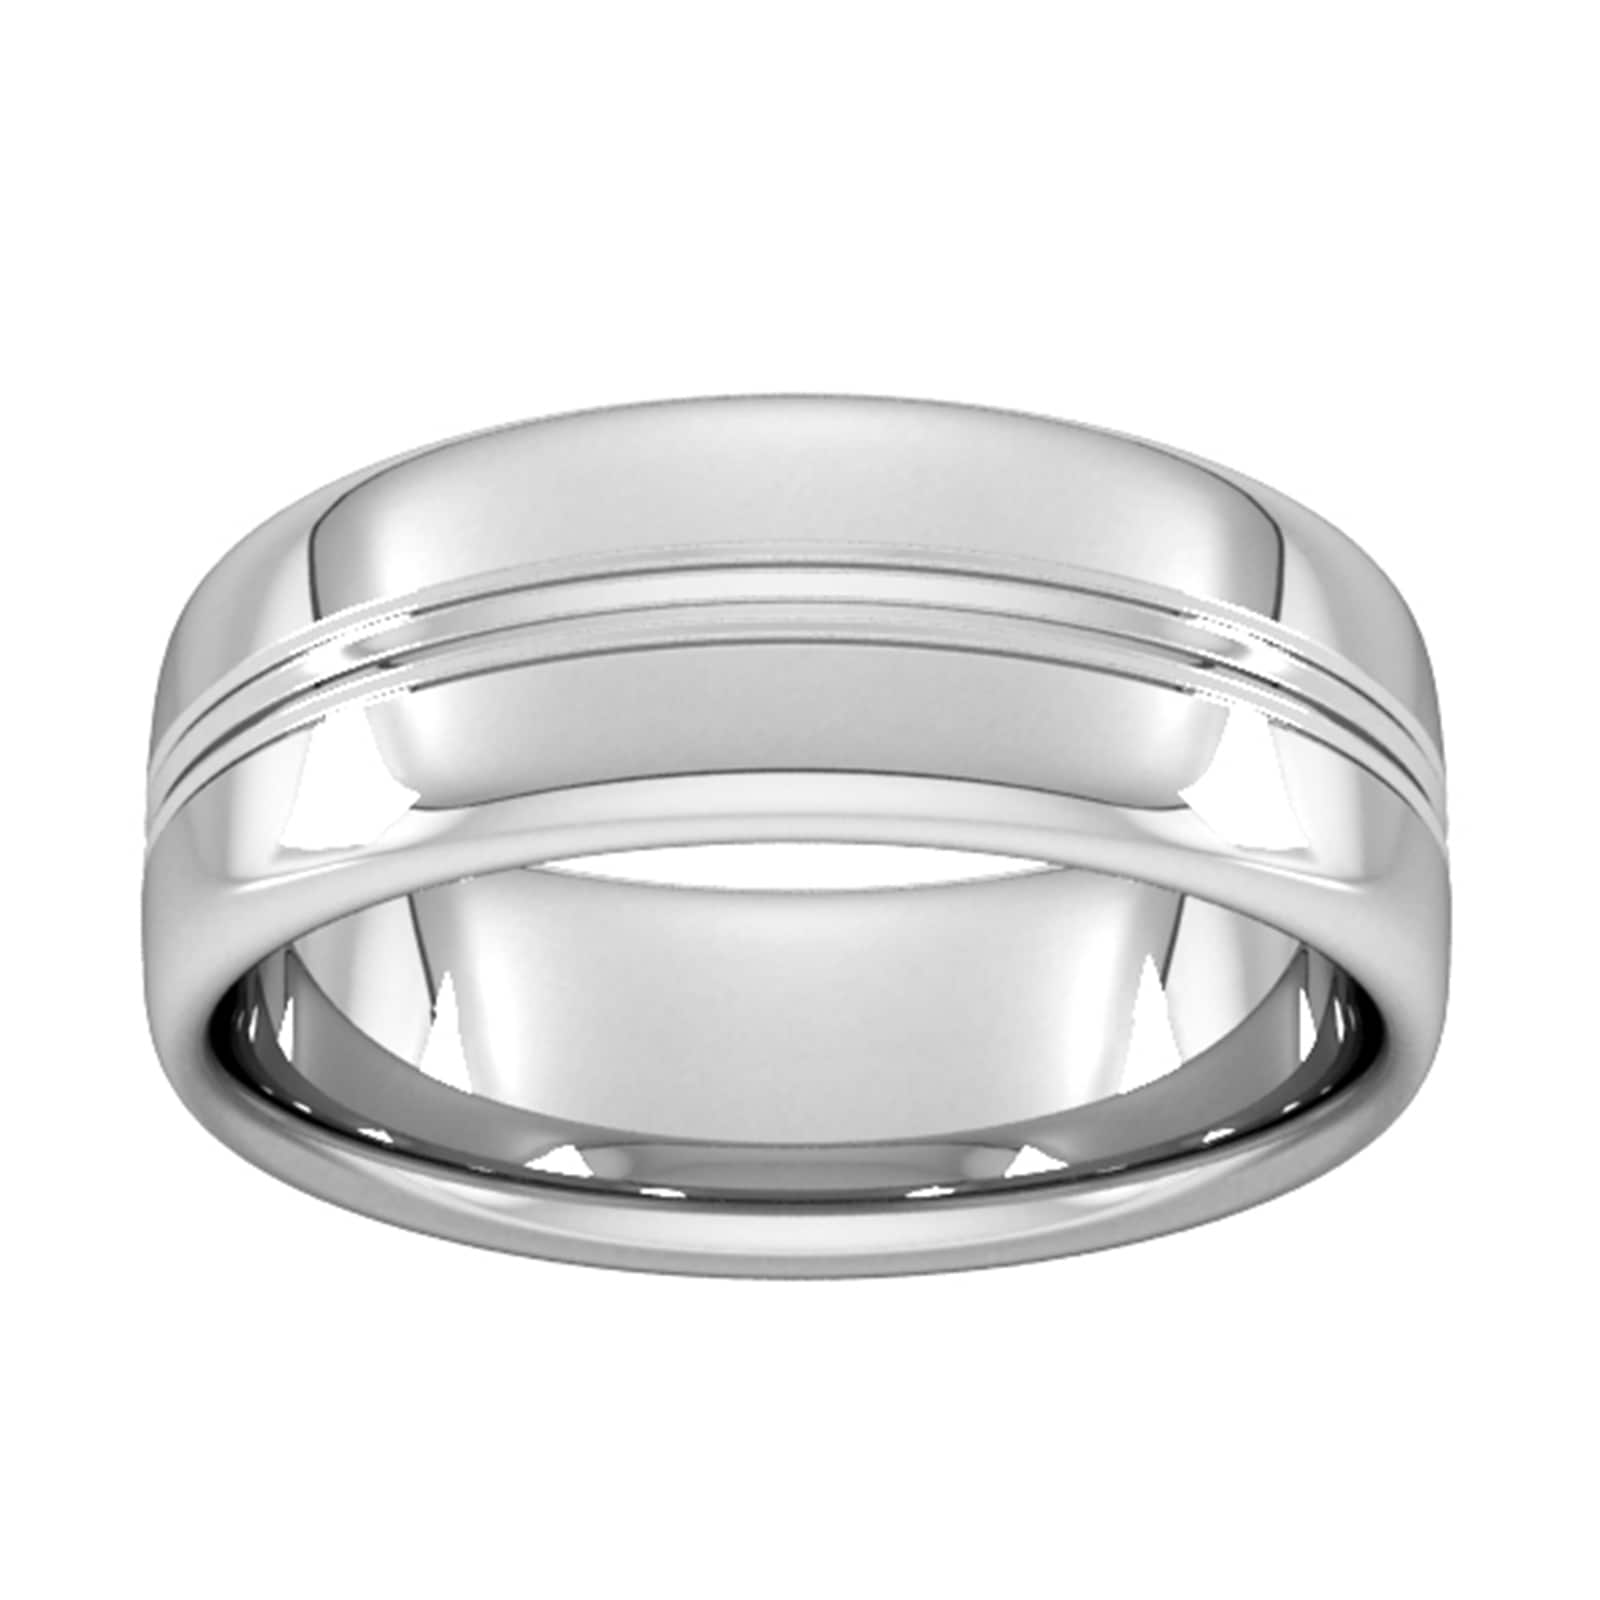 8mm Slight Court Heavy Grooved Polished Finish Wedding Ring In 18 Carat White Gold - Ring Size H